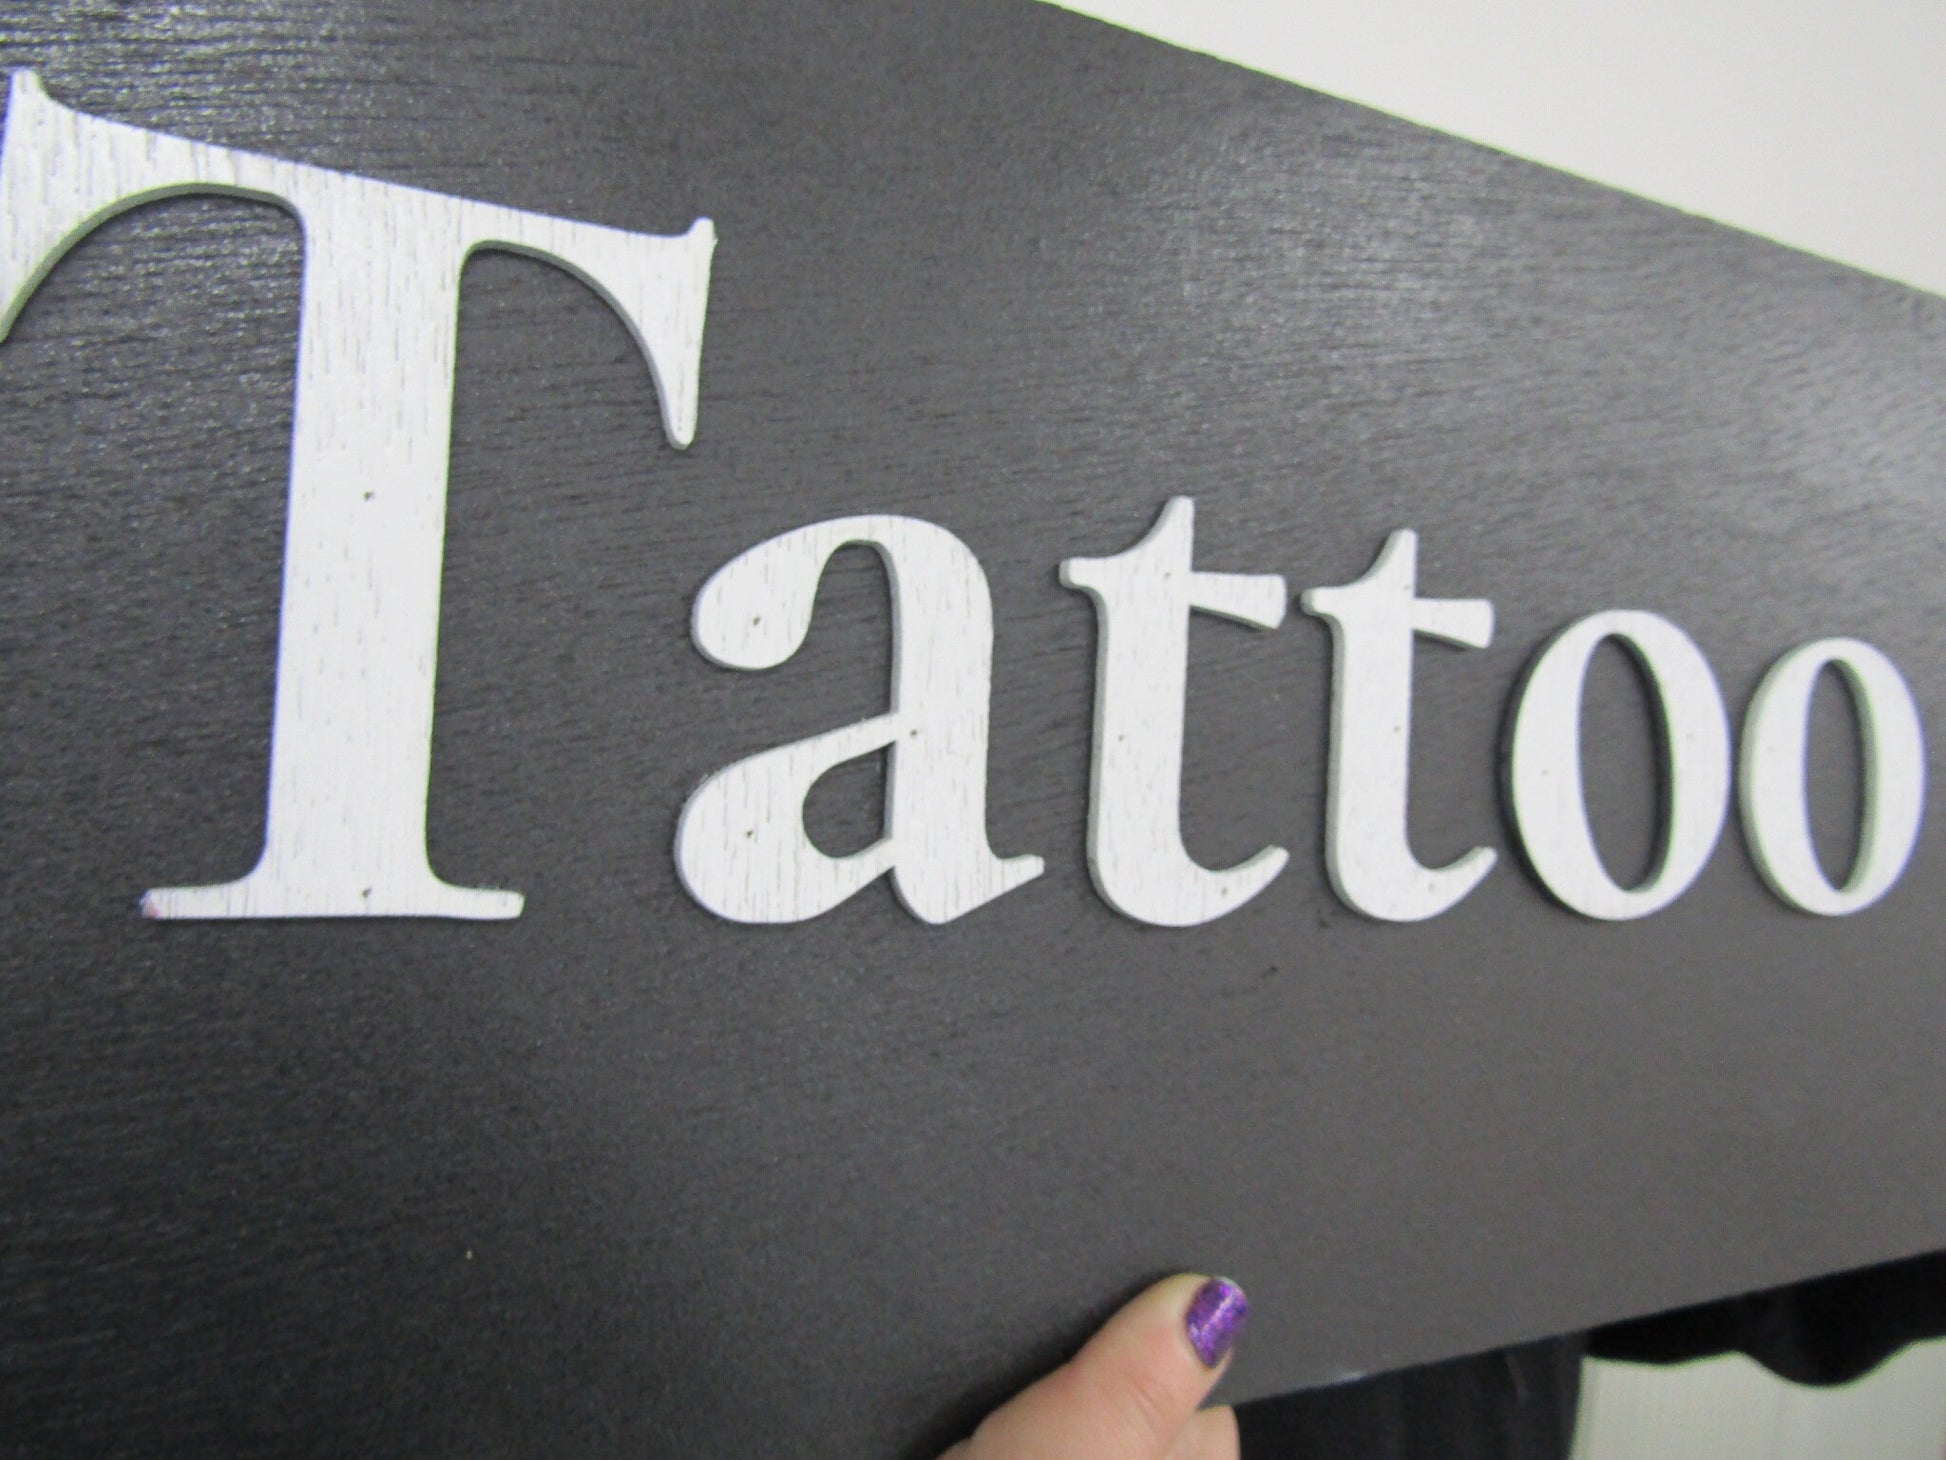 Custom Tattoo Gallery Sign Commerical Signage Studio Literary Directional 3D Raised Personalized Large Business Co Made To Order Wooden Sign